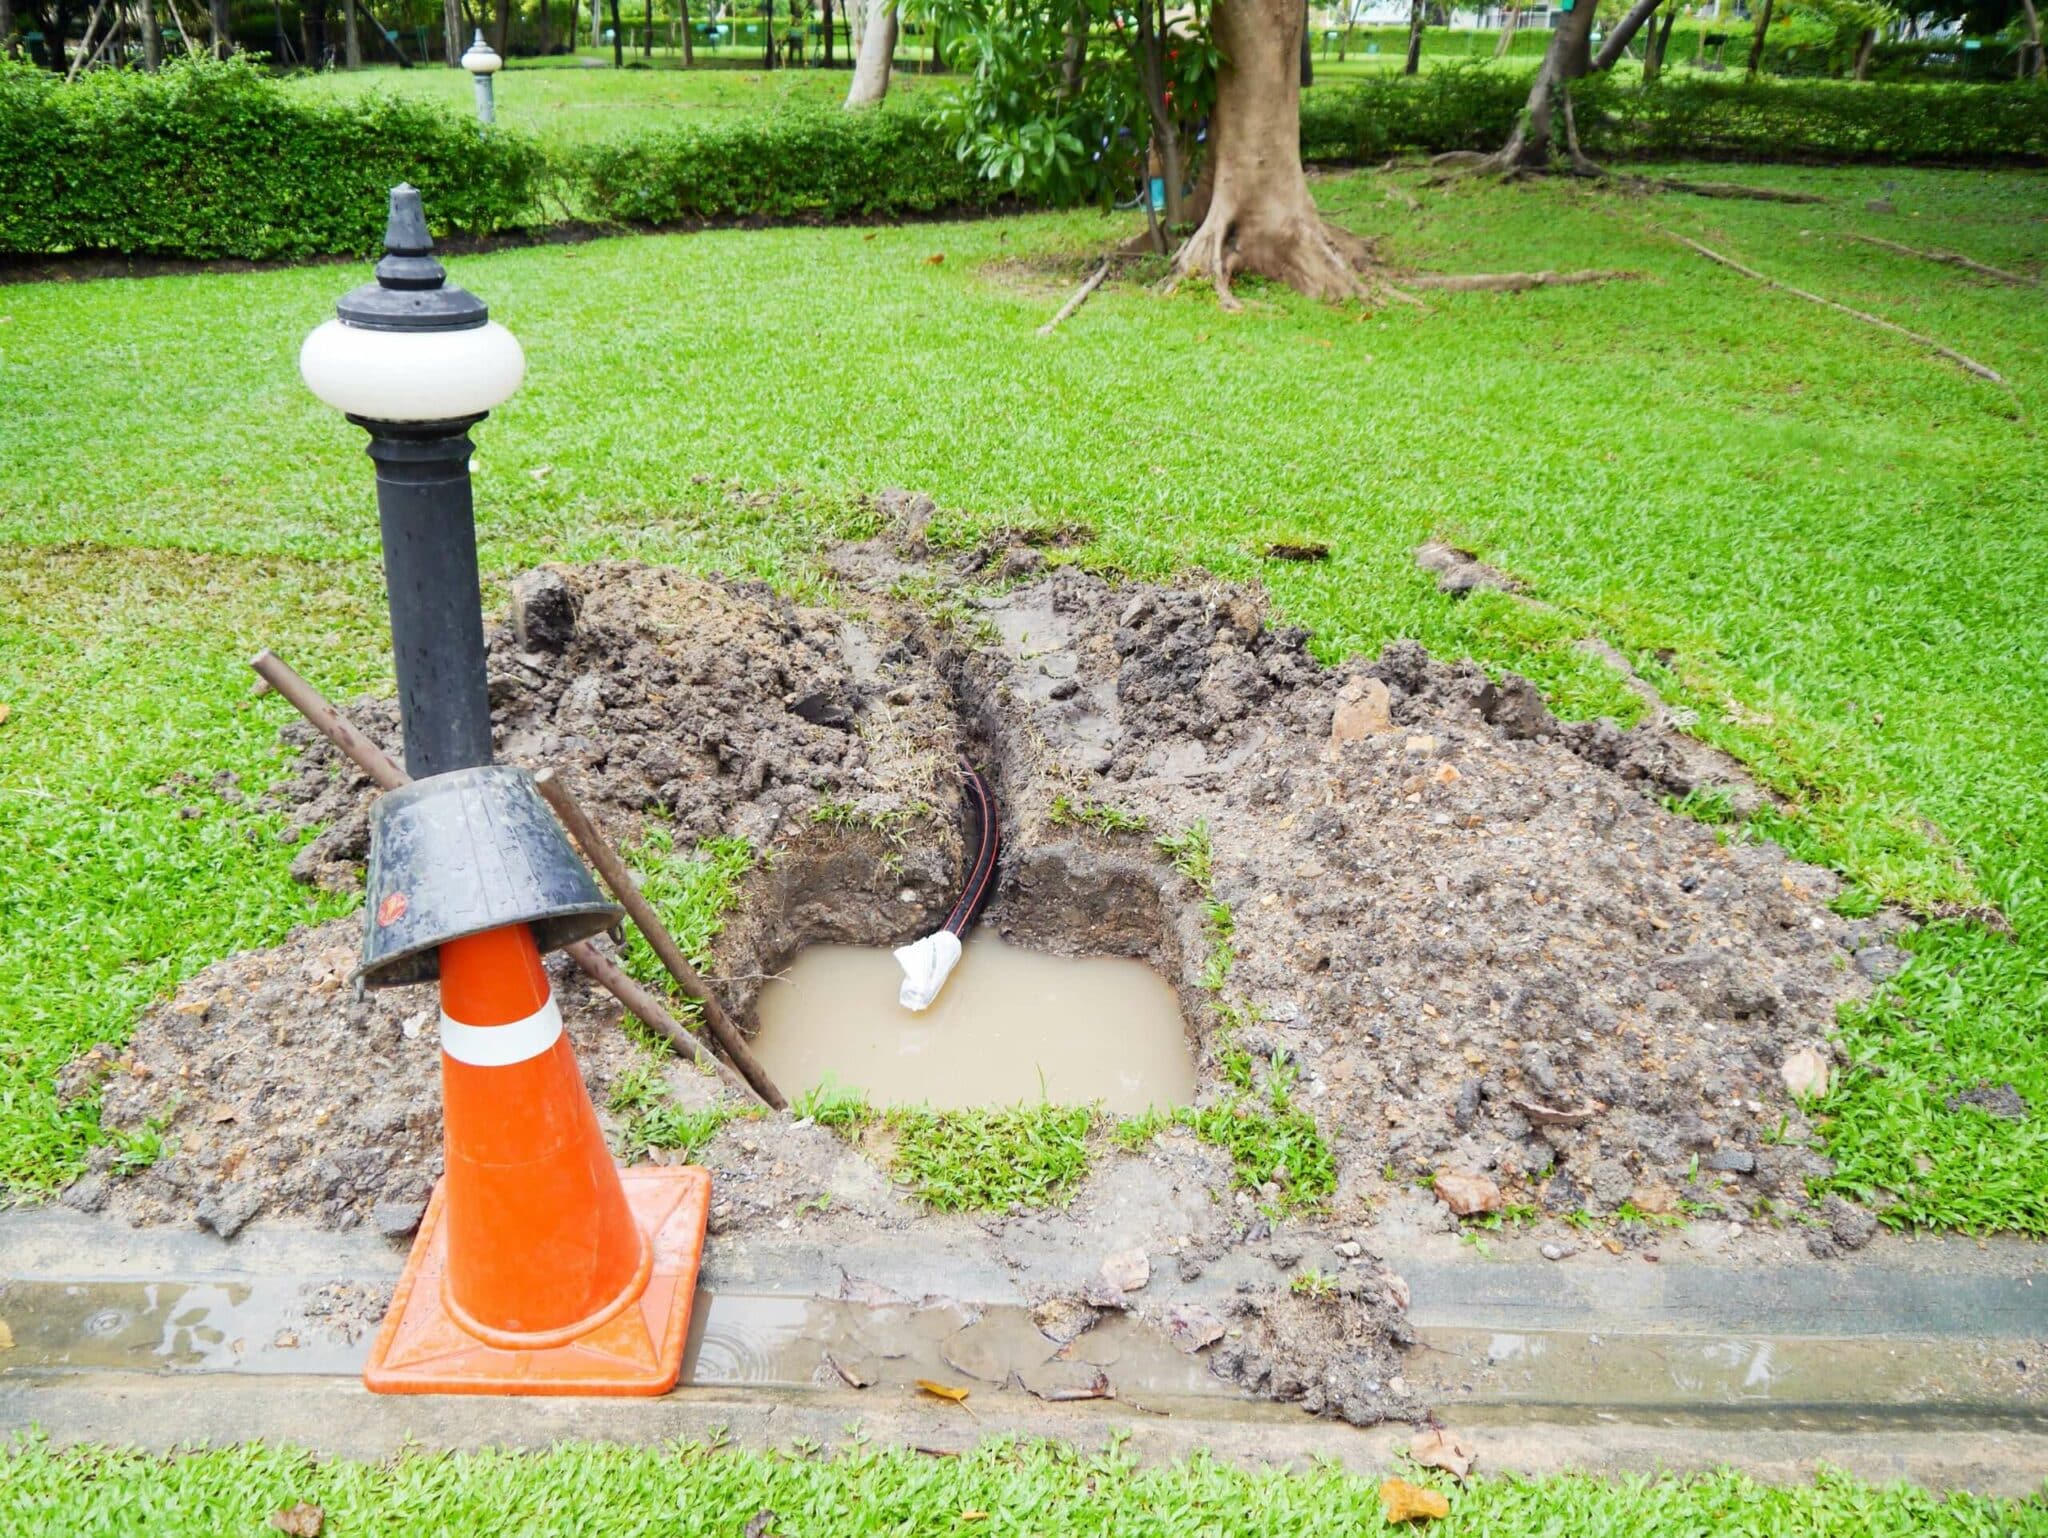 4 Reasons Why DIY Sewer Line Repairs Do More Harm than Good